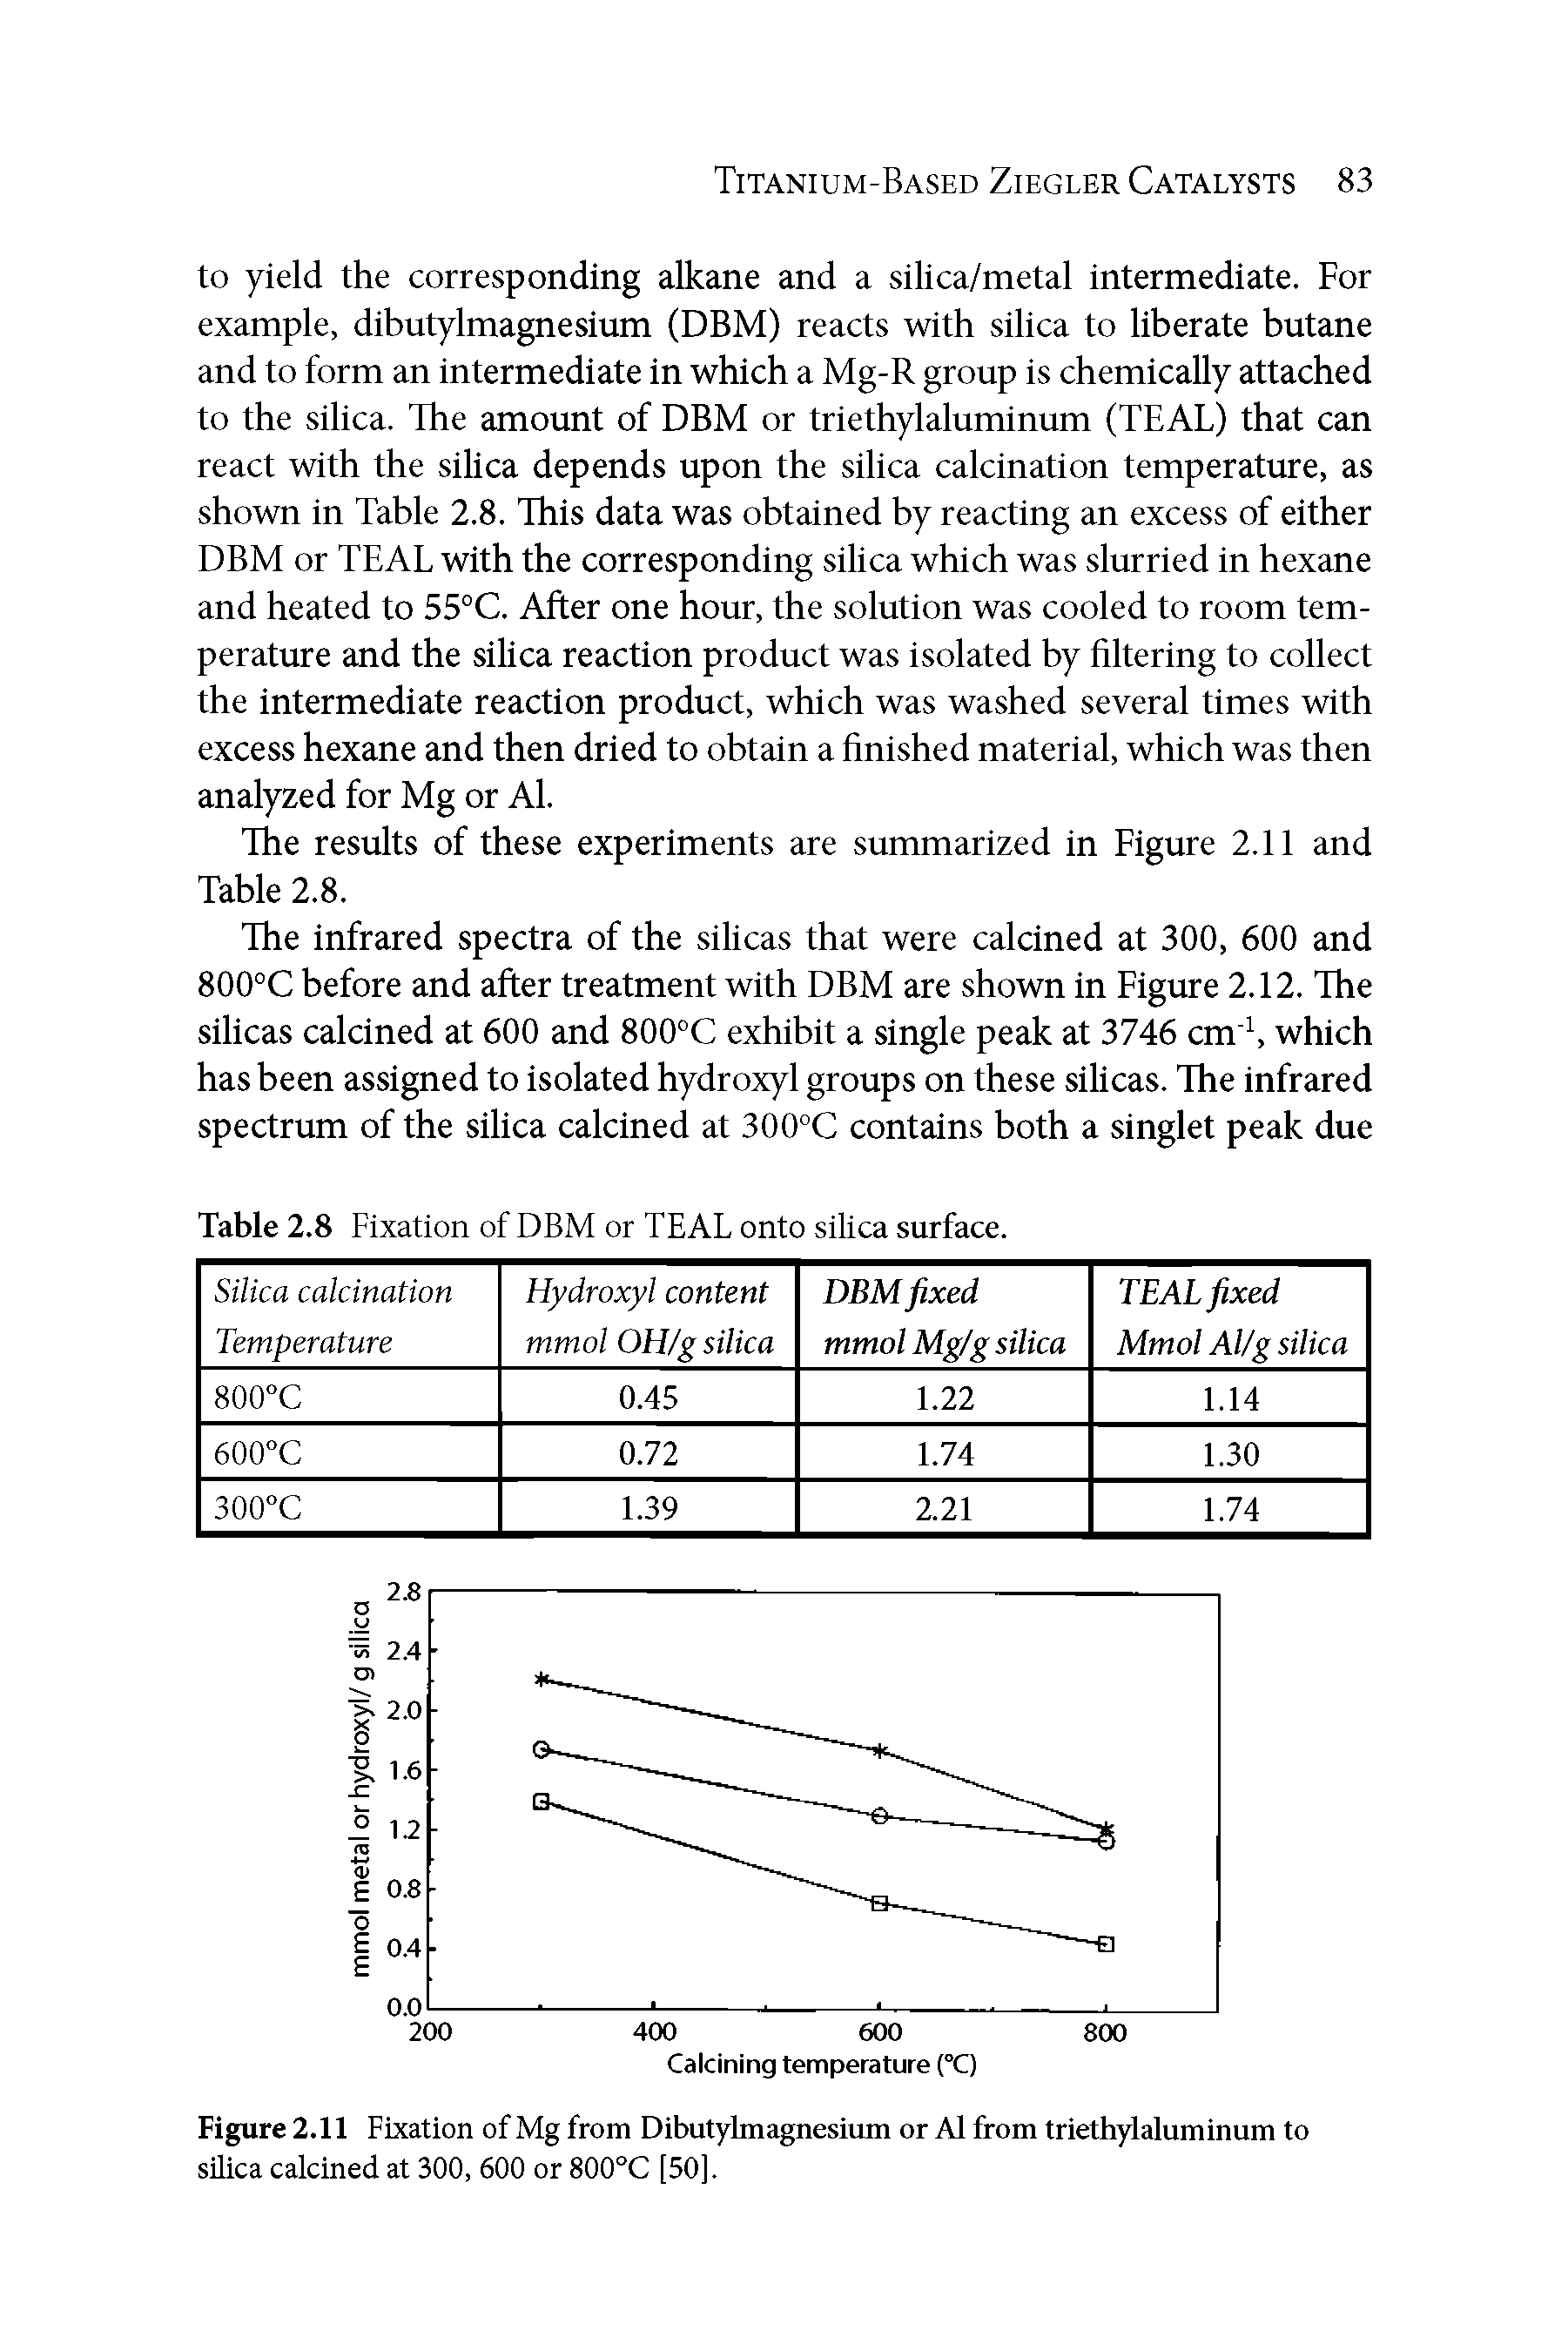 Figure 2.11 Fixation of Mg from Dibutylmagnesium or Al from triethylaluminum to silica calcined at 300, 600 or 800°C [50].